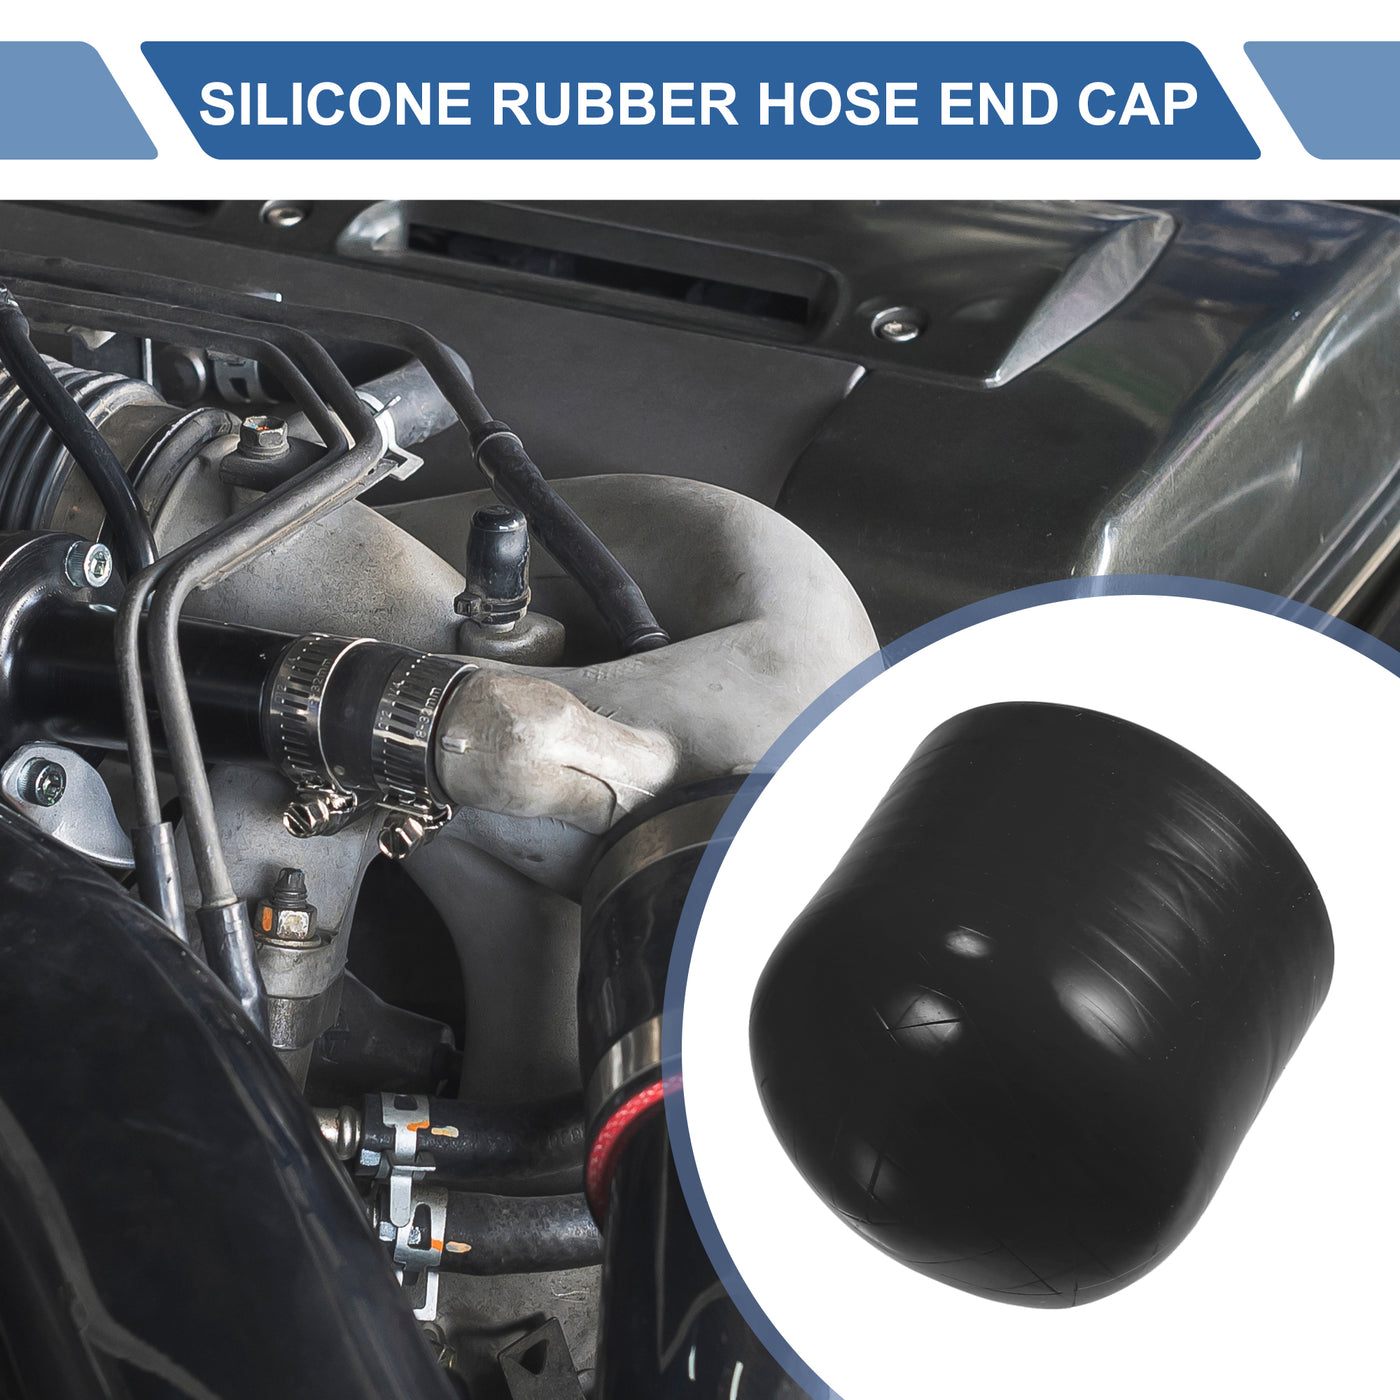 X AUTOHAUX 1 Set 30mm Length 40mm/1.57" ID Black Car Silicone Rubber Hose End Cap with Clamps Silicone Reinforced Blanking Cap for Bypass Tube Universal